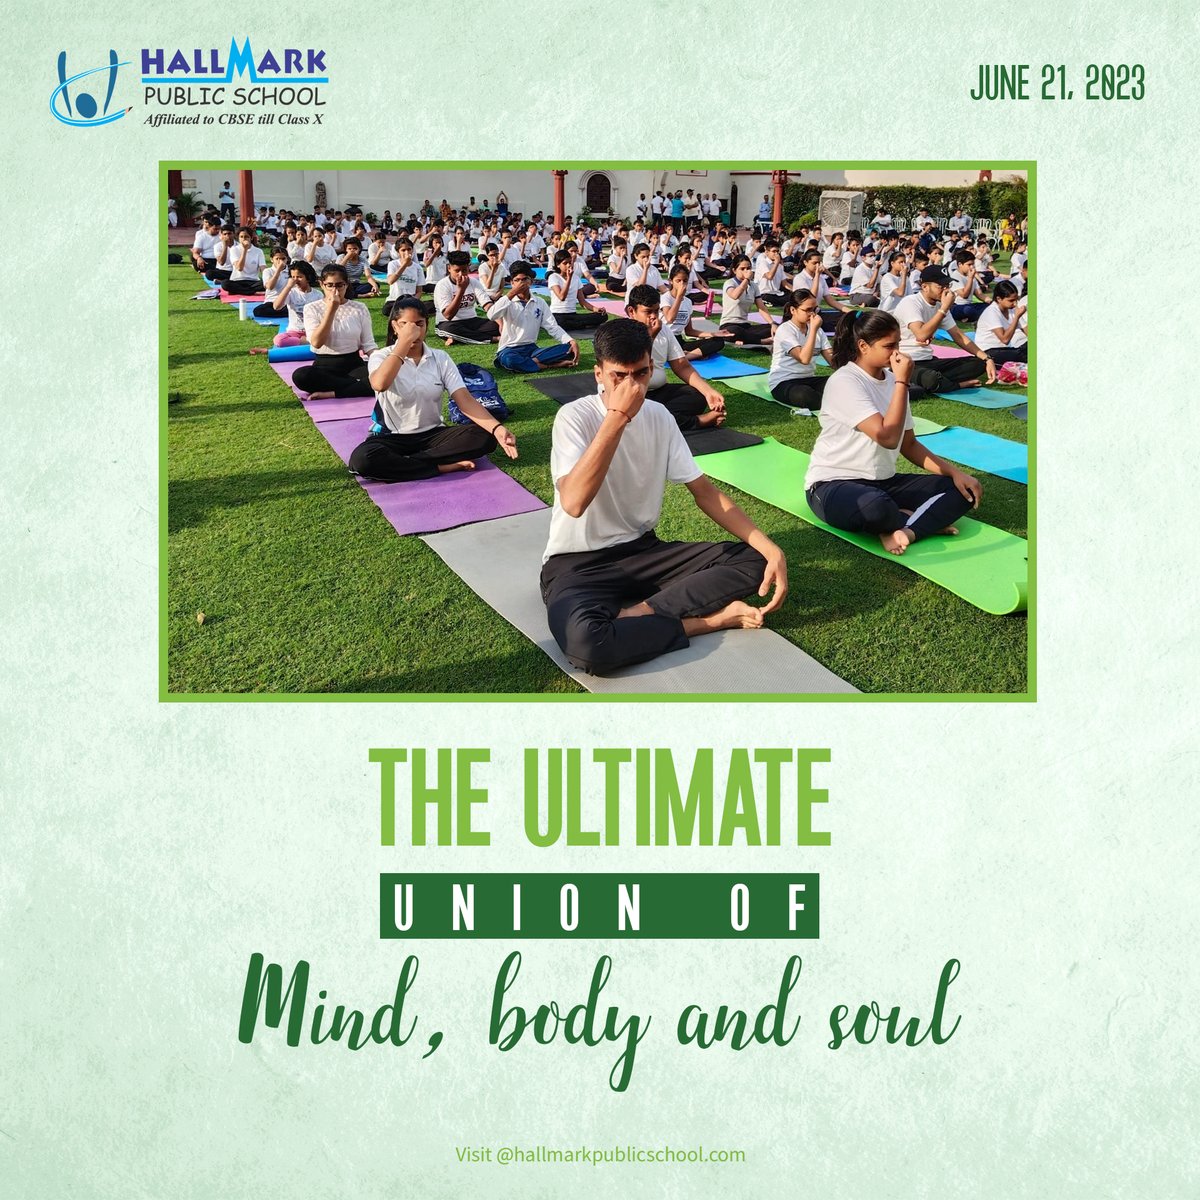 On International Yoga Day, let's focus on our breath and find our inner calm through this beautiful practice🧘‍♀️

#InternationalYogaDay #YogaBreath #FindYourCalm #HallmarkPublicSchool #LifelongLearning #CBSESchoolInPanchkula #Education #School #Learning